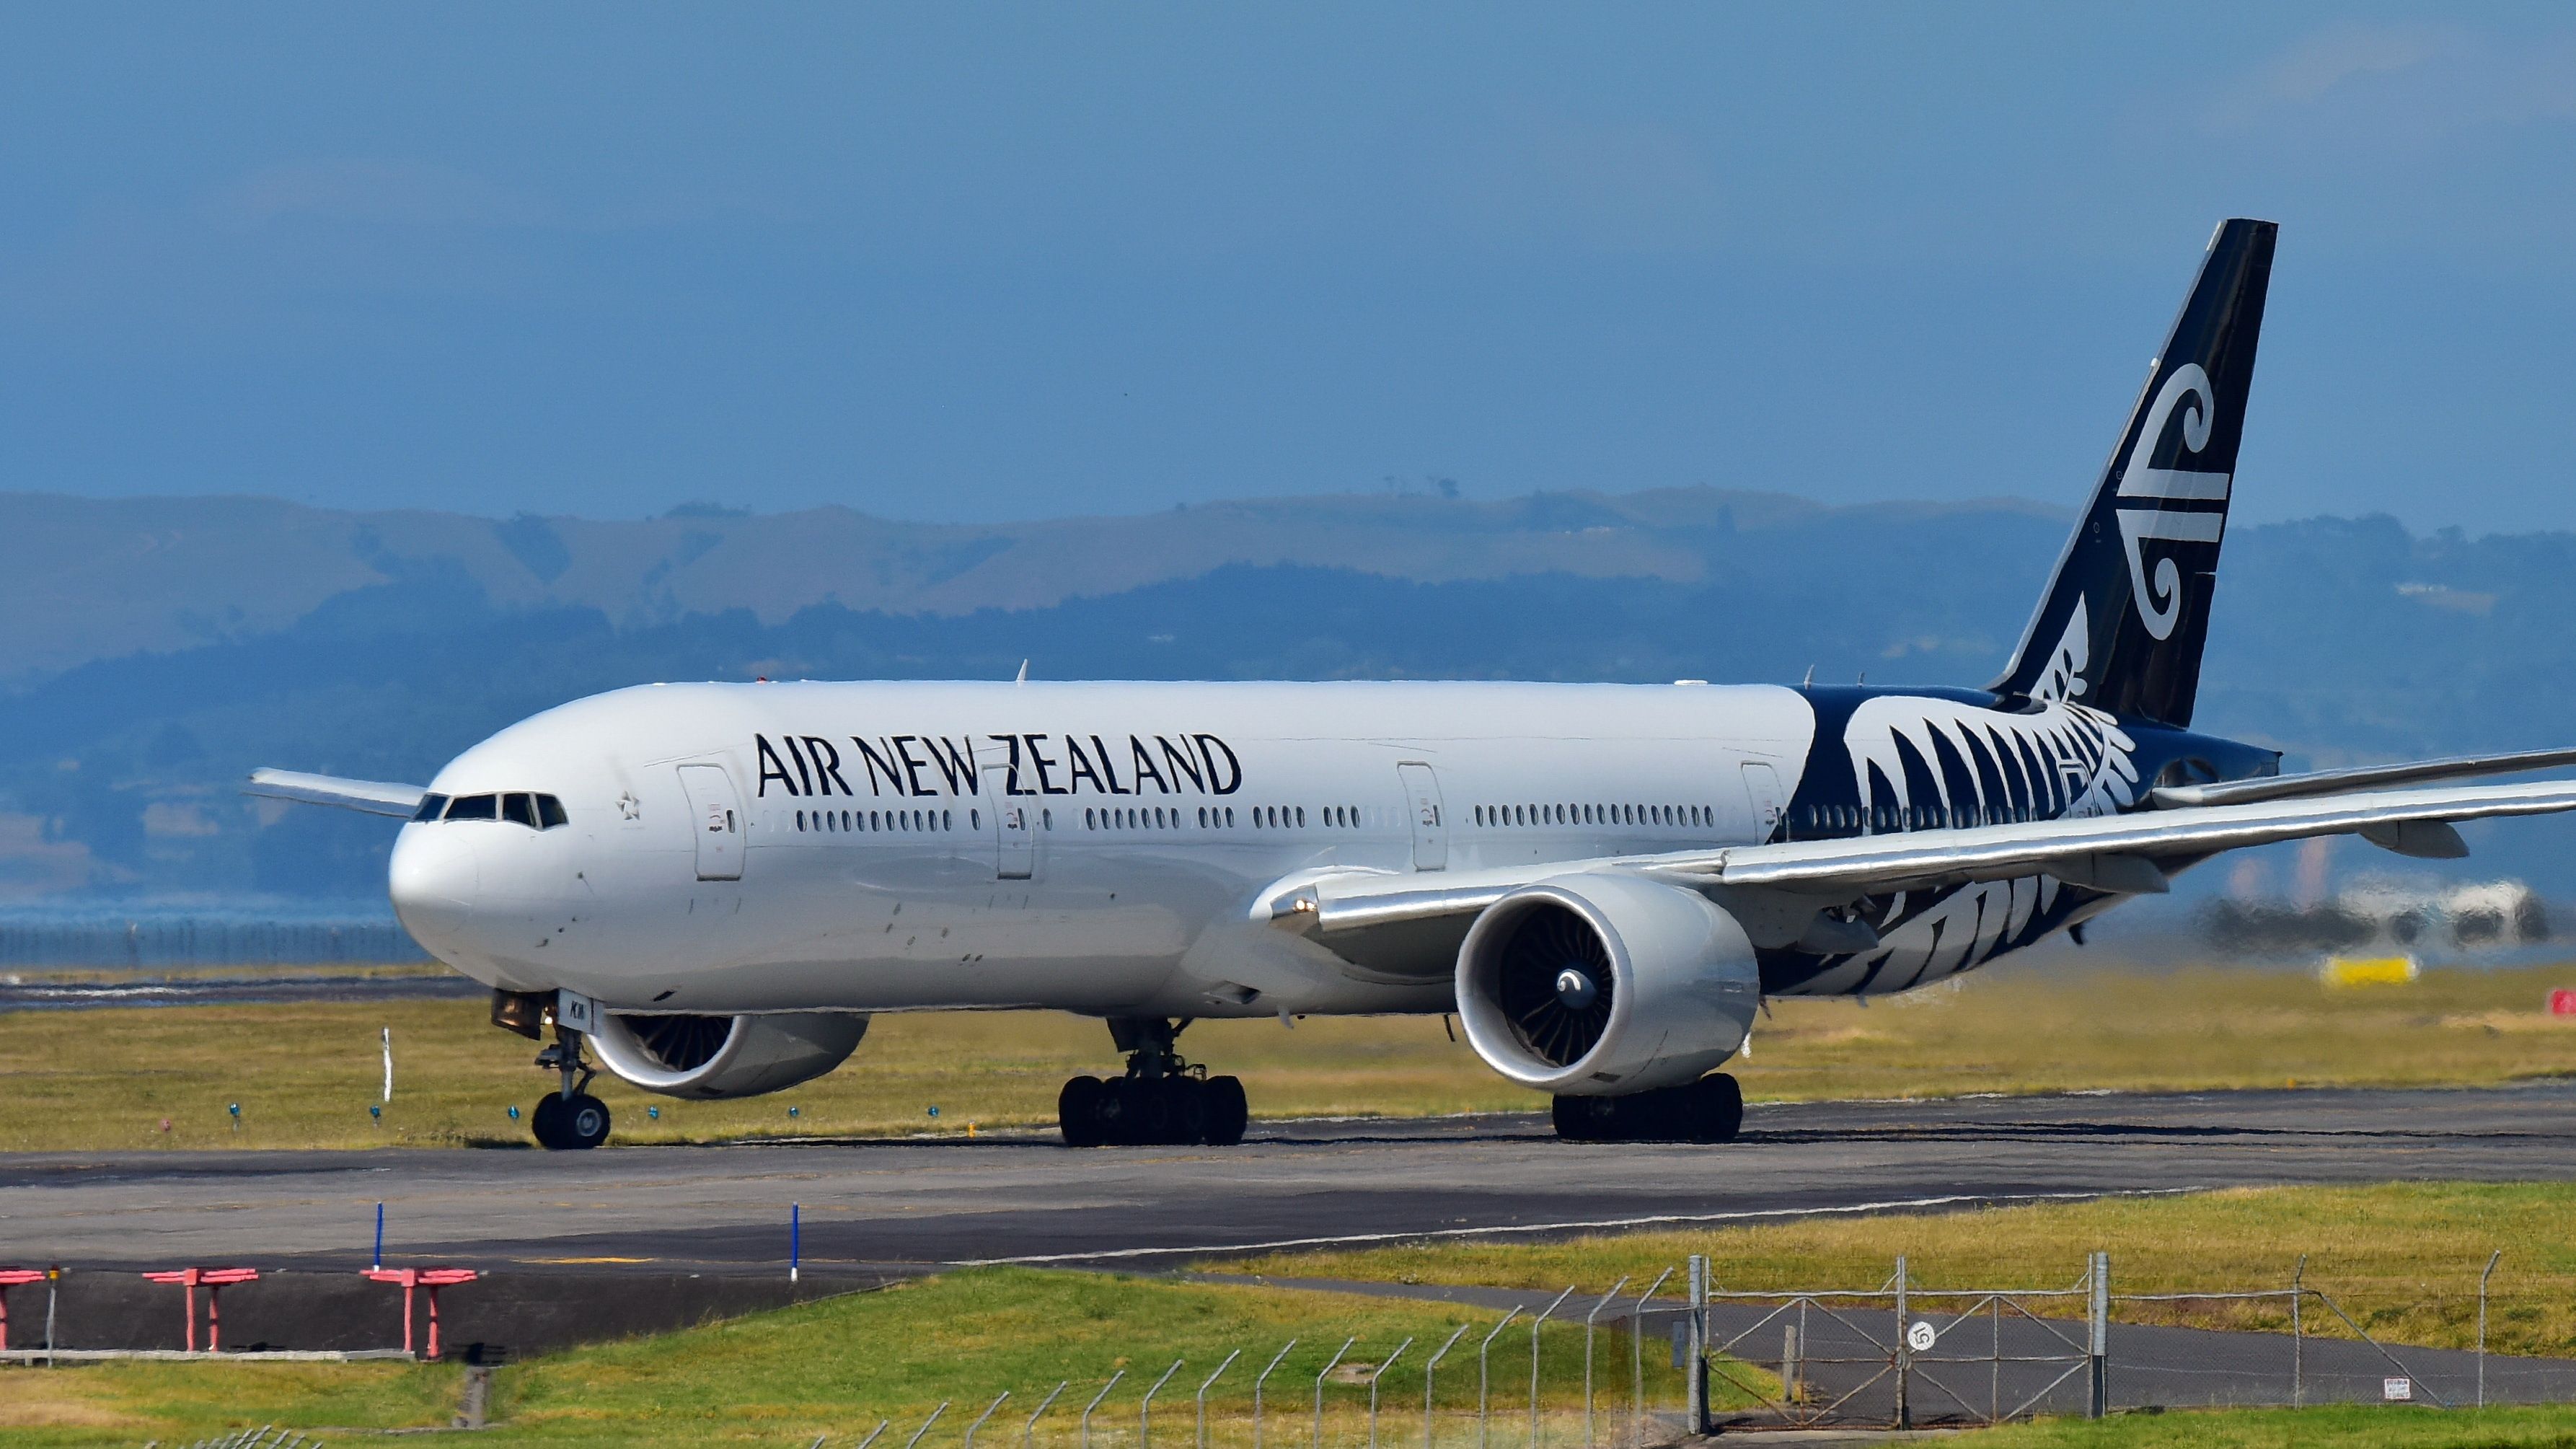 Air New Zealand Is Planning To Lease A Boeing 777-300ER